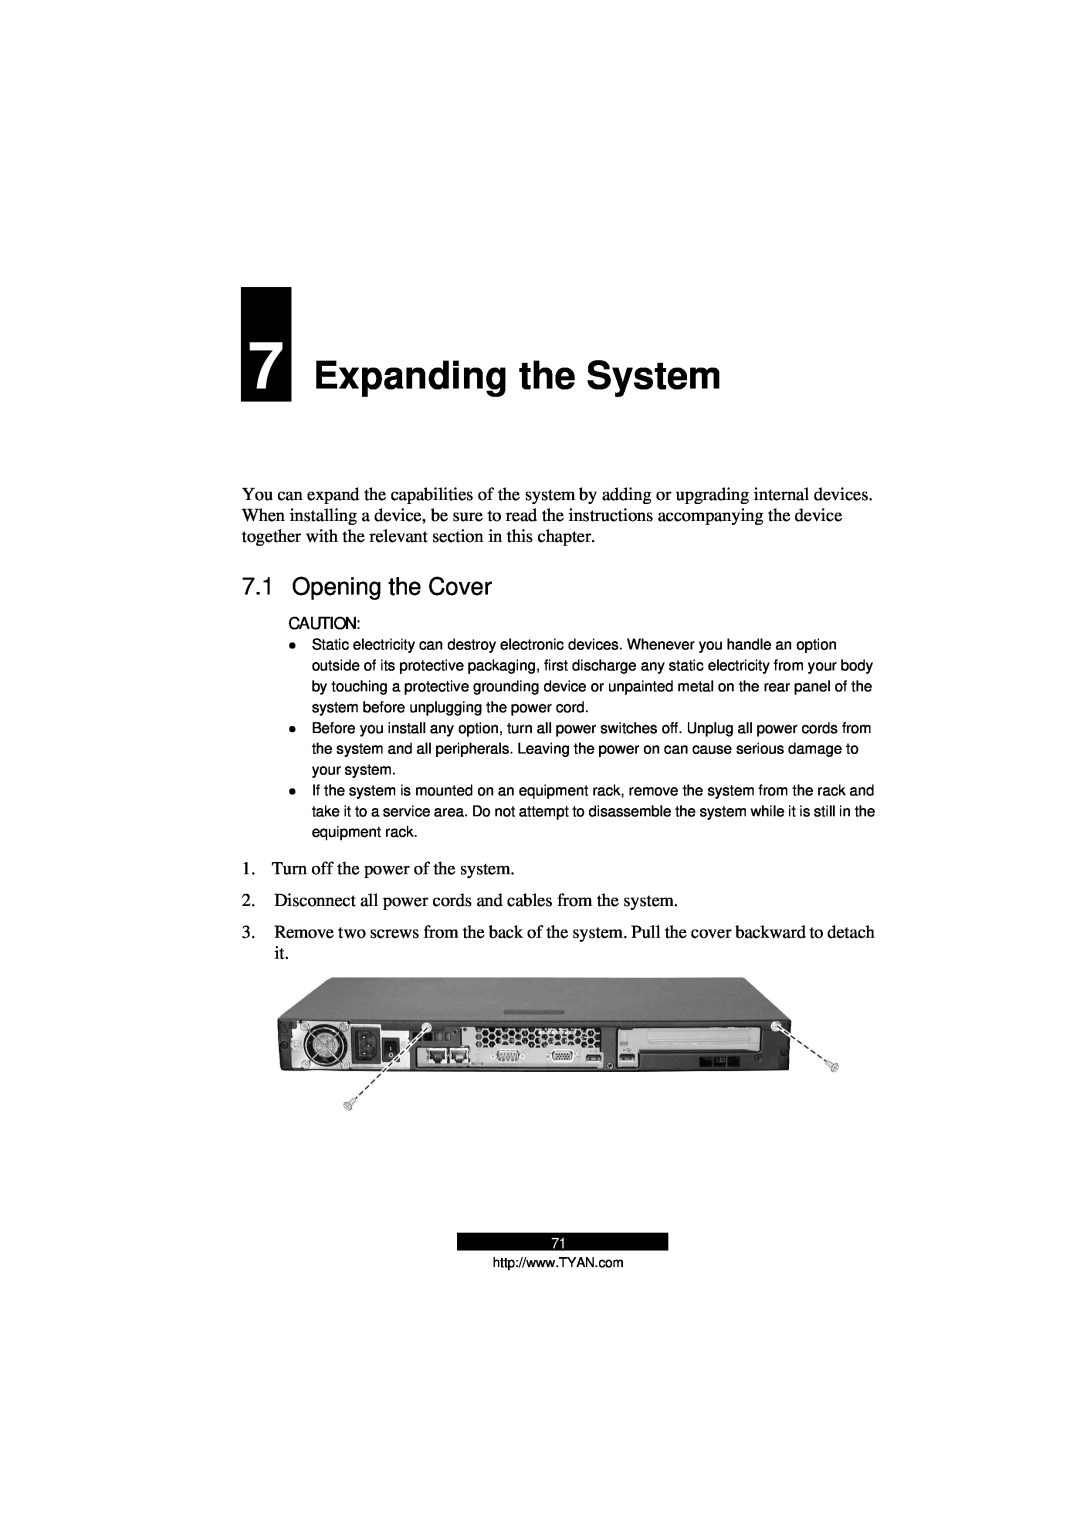 Tyan Computer B5103G12S2, Transport GS12 manual Expanding the System, Opening the Cover 